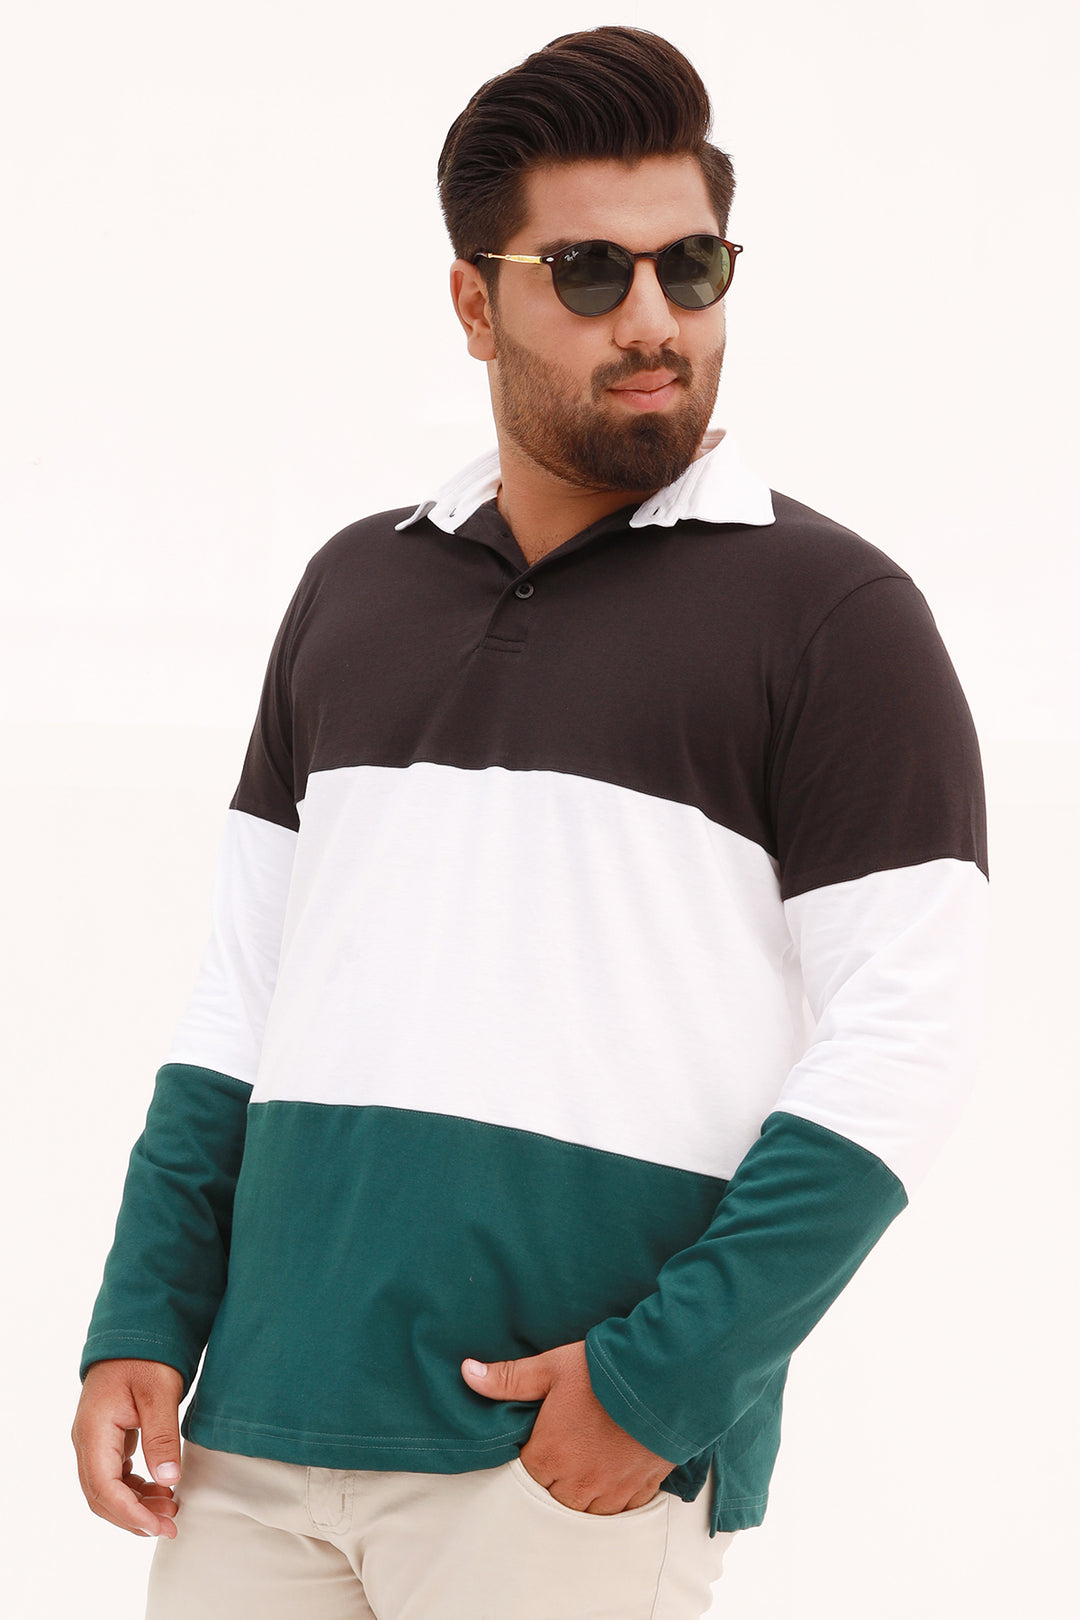 Teal Tri-Color Rugby Polo Shirt (Plus Size) - S22 - MP0118P